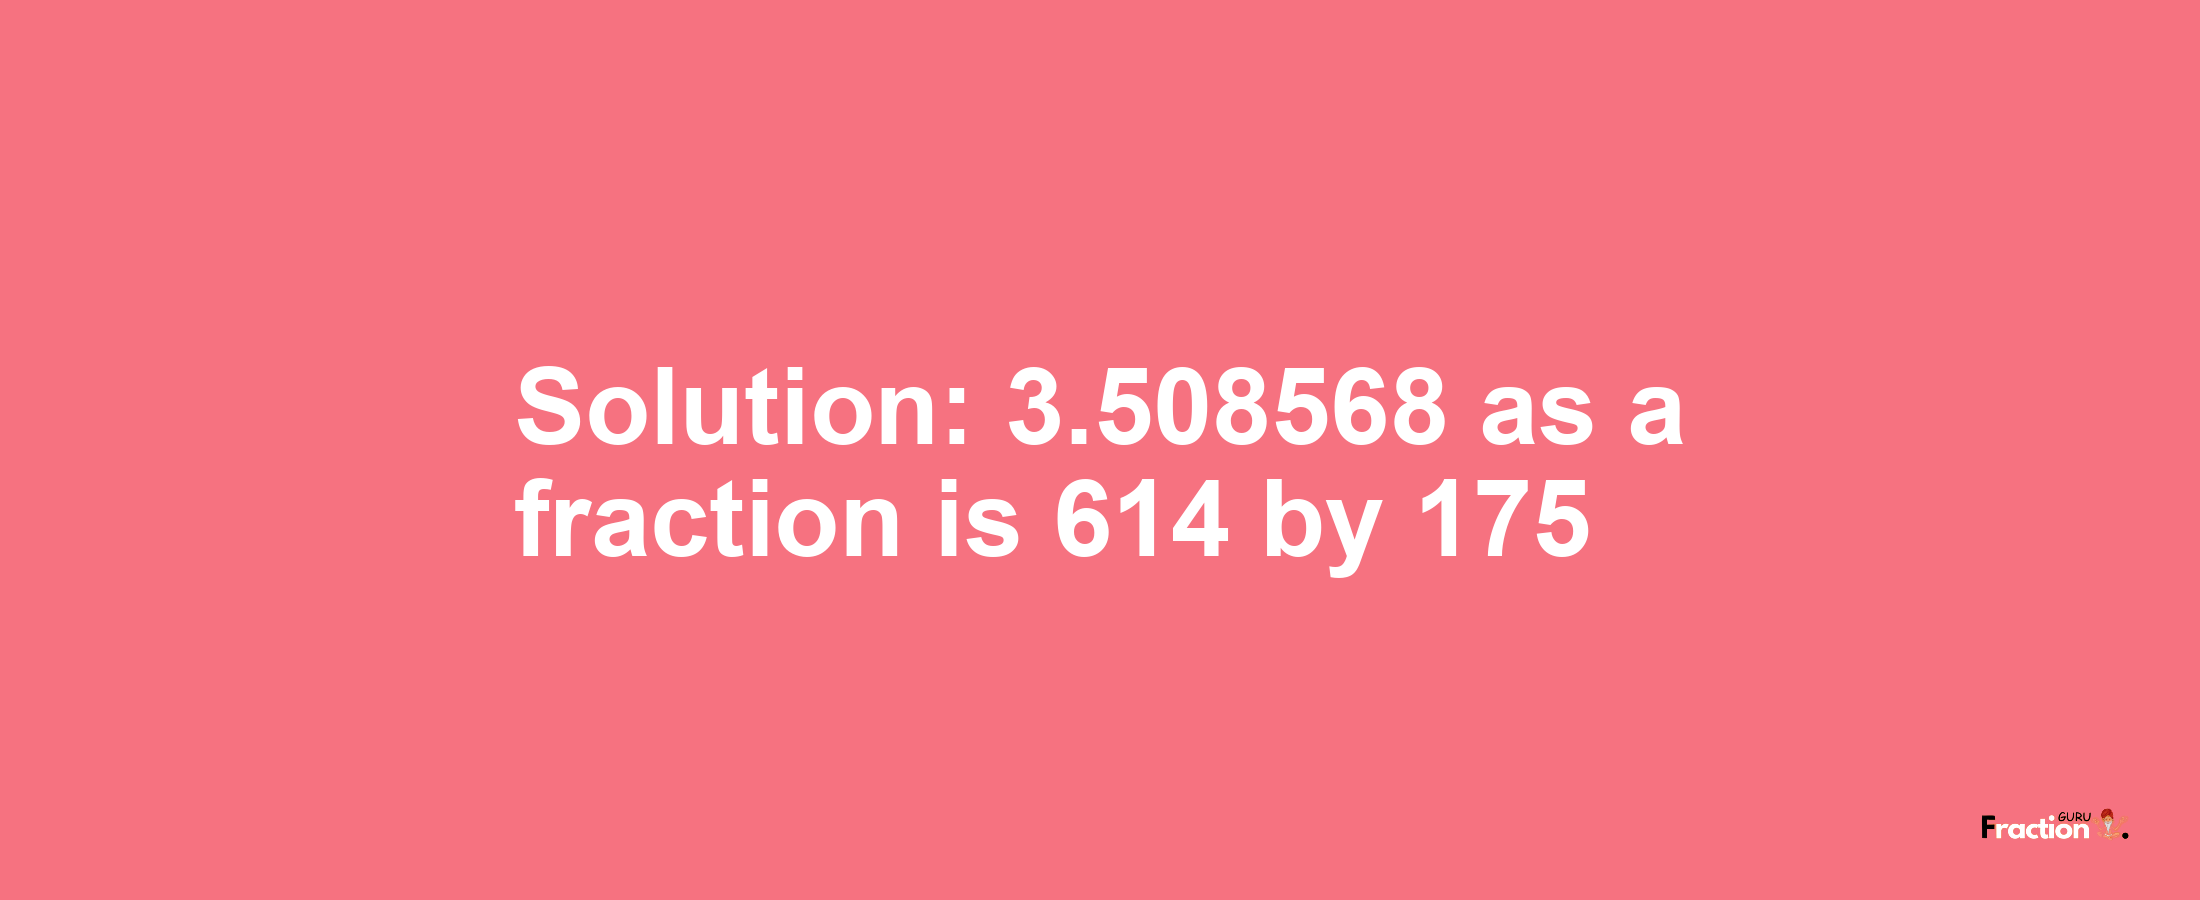 Solution:3.508568 as a fraction is 614/175